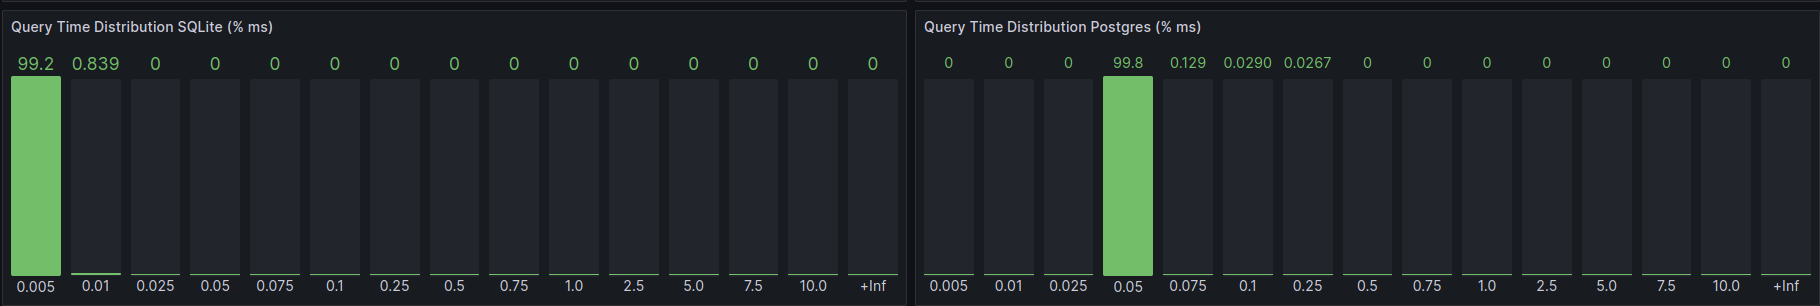 Query time distribution